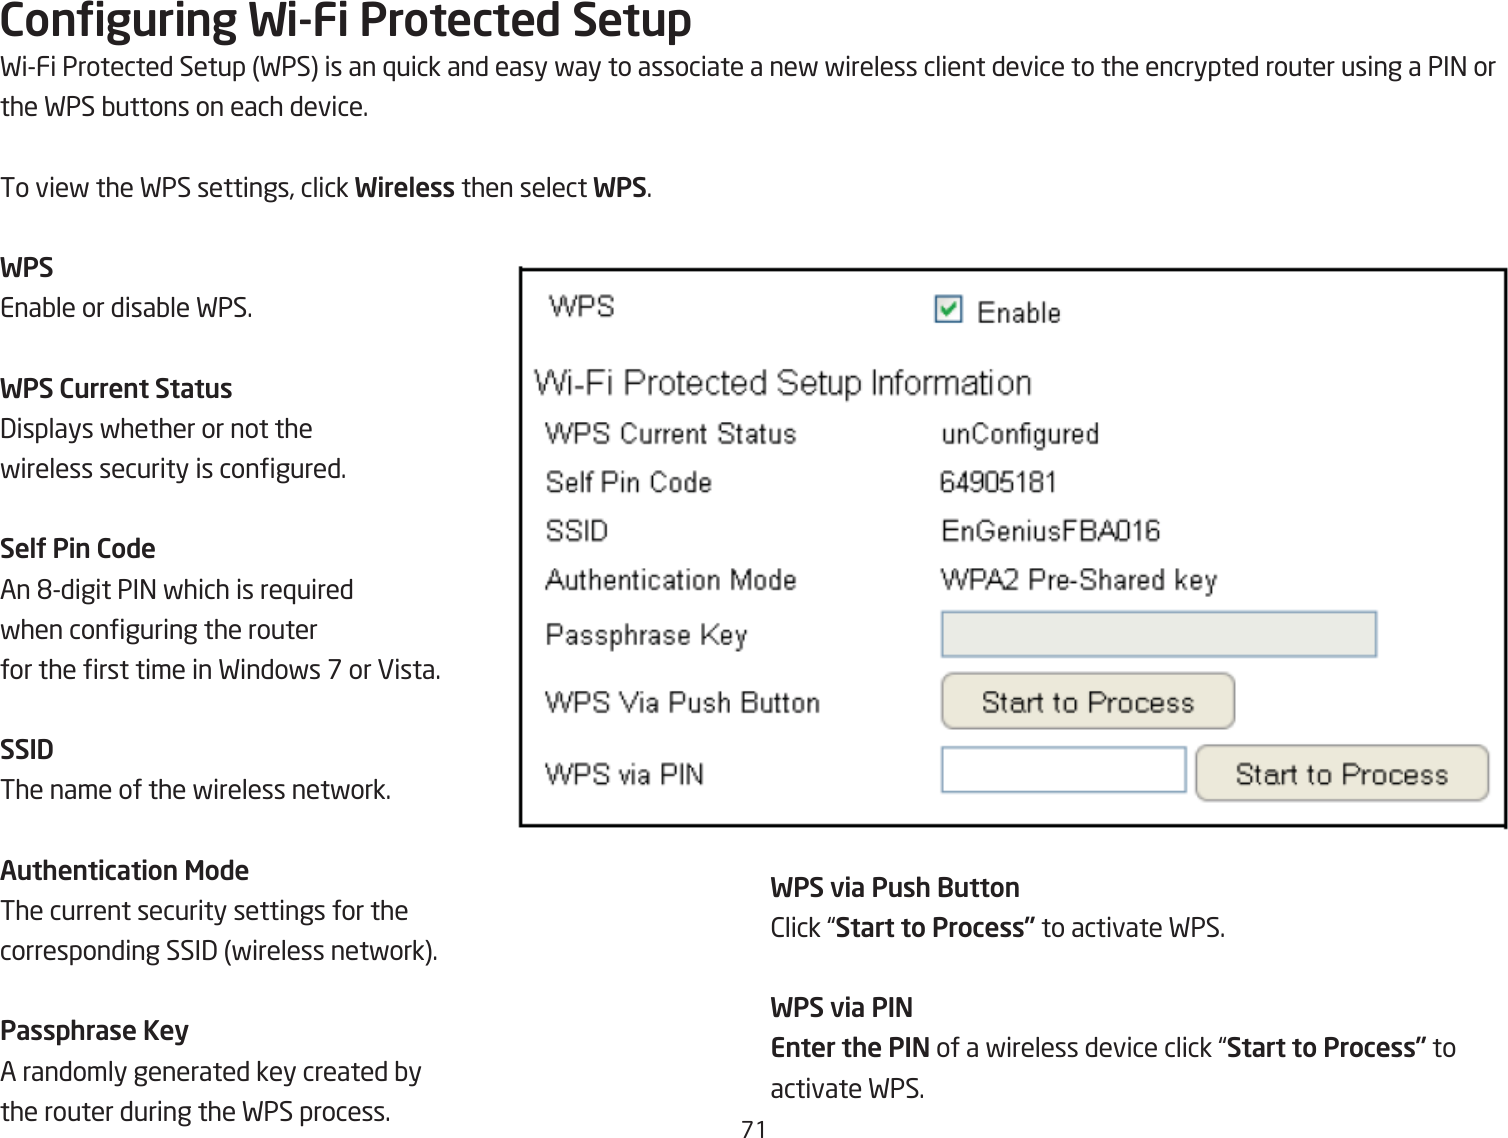 &amp;1Conguring Wi-Fi Protected SetupFiFi Protected Setup FPS is an `uick and easy fay to associate a nef fireless client device to the encrypted router using a PI= or the FPS Quttons on each device.To vief the FPS settings, click Wireless then select WPS.WPSEnaQle or disaQle FPS.WPS Current Status3isplays fhether or not thefireless security is congured.SelU Pin CodeAn &apos;digit PI= fhich is re`uired fhen conguring the routerfor the rst time in Findofs &amp; or Vista.SSIDThe name of the fireless netfork.Authentication ModeThe current security settings for the corresponding SSI3 fireless netfork.Passphrase KeyA randomly generated key created Qy the router during the FPS process.WPS via Push Button2lick |Start to Process” to activate FPS.WPS via PINEnter the PIN of a fireless device click |Start to Process” to activate FPS.